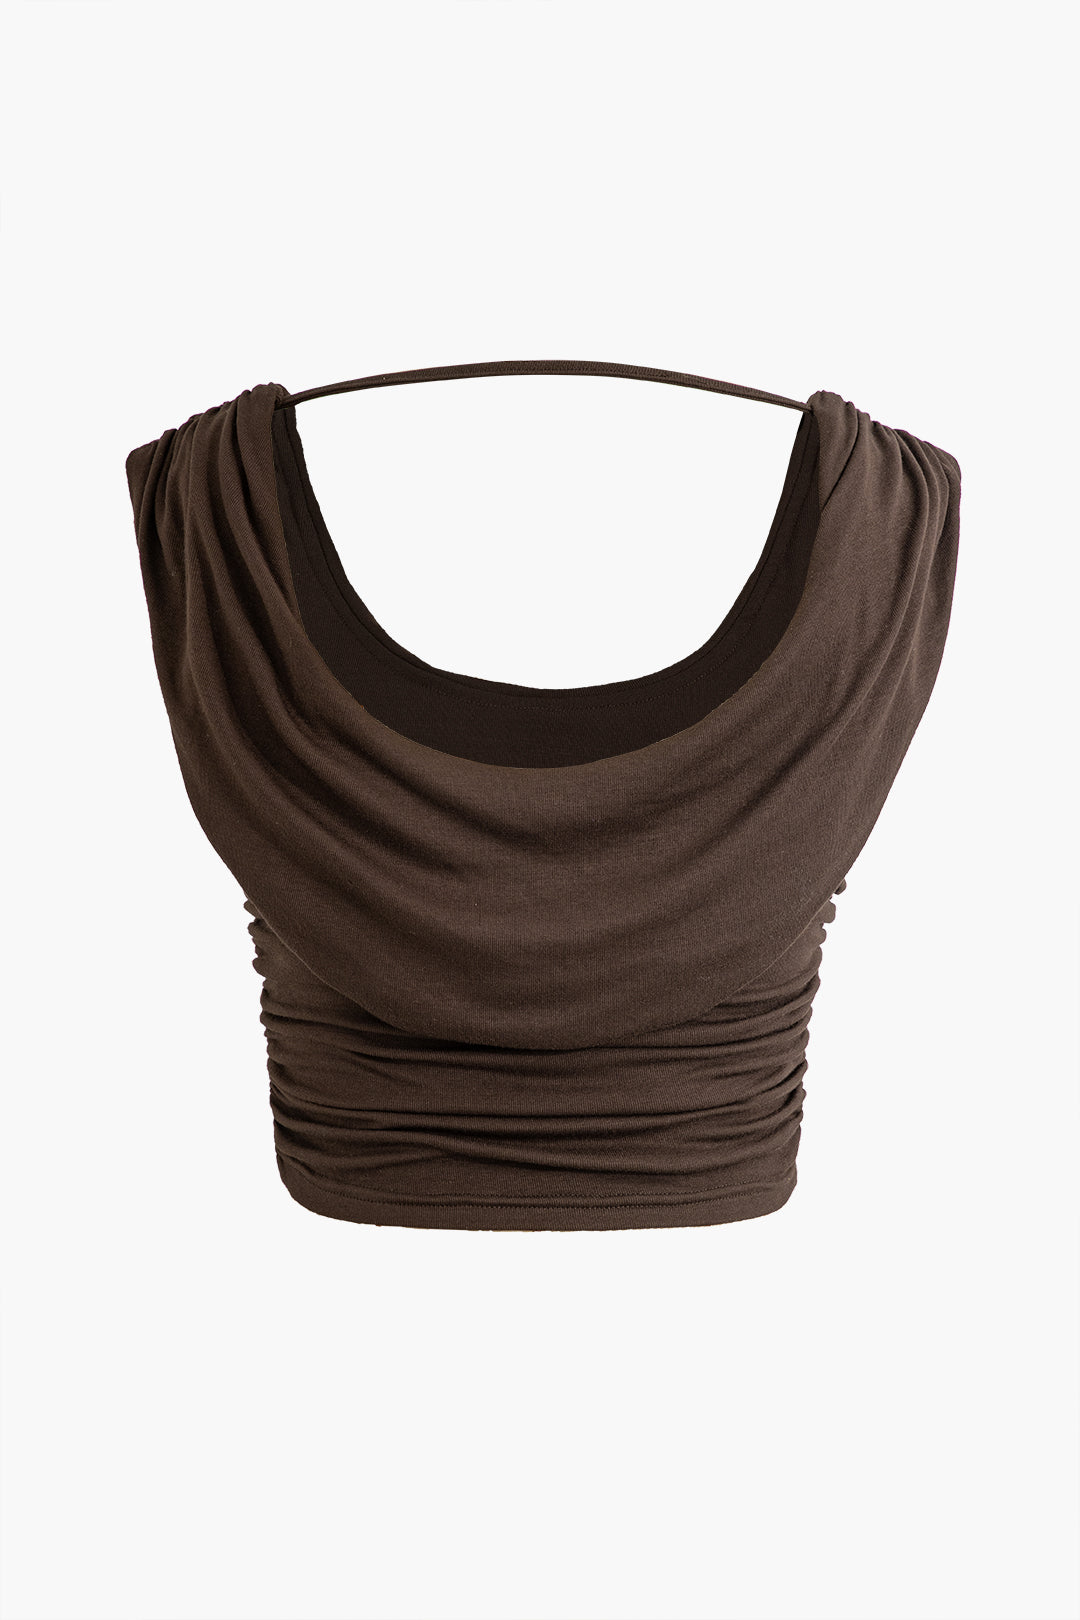 Solid Ruched Tank Top